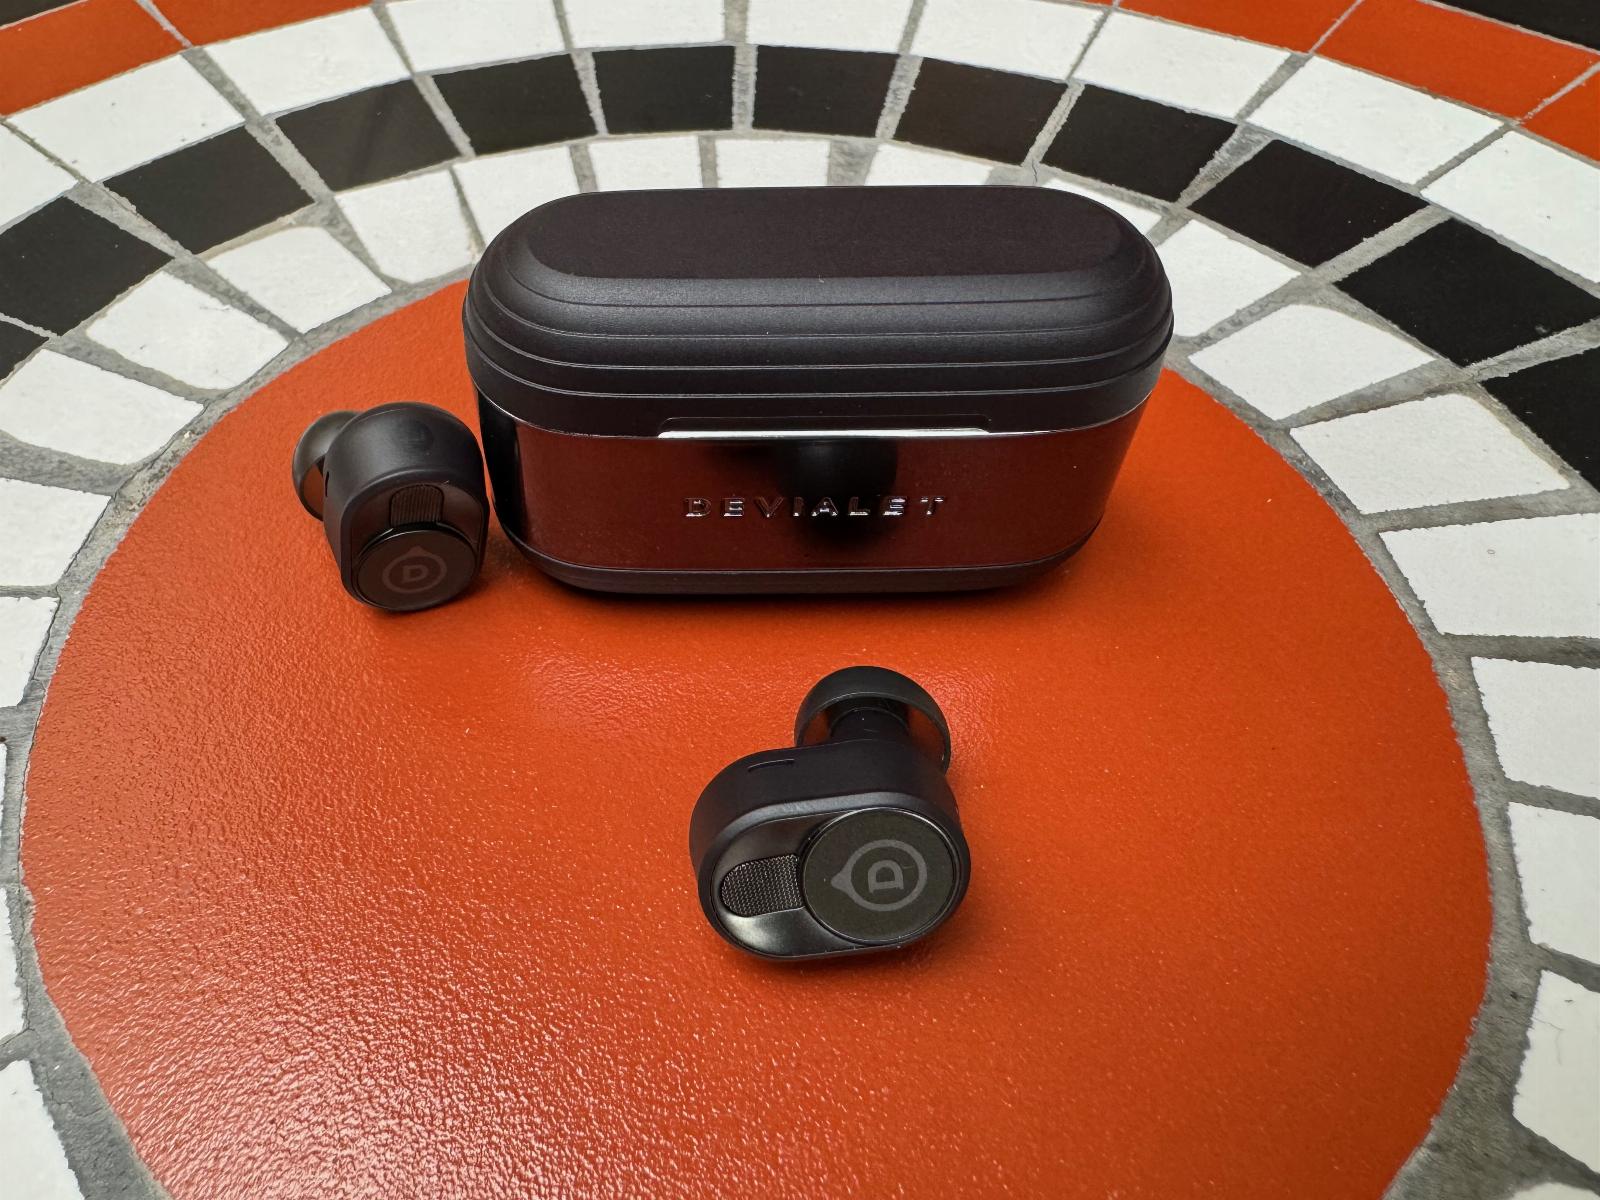 Devialet’s Gemini II are the most luxurious wireless earbuds you can get